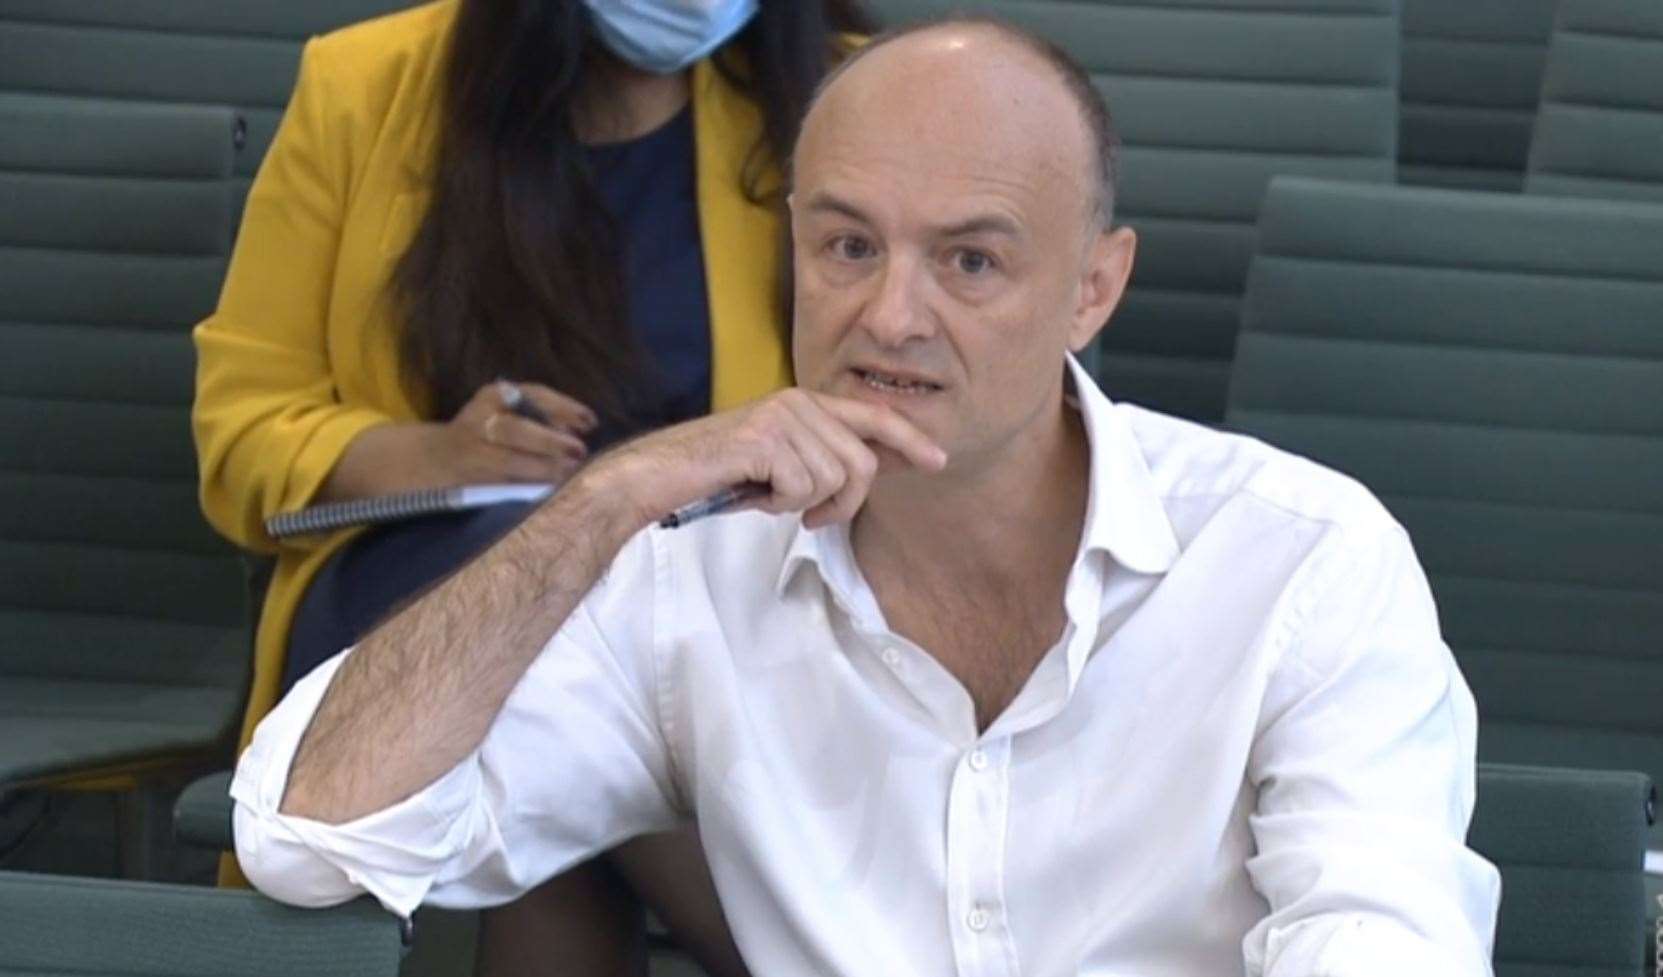 Dominic Cummings before the select committee where he first publicly attacked the Health Secretary (PA/House of Commons)